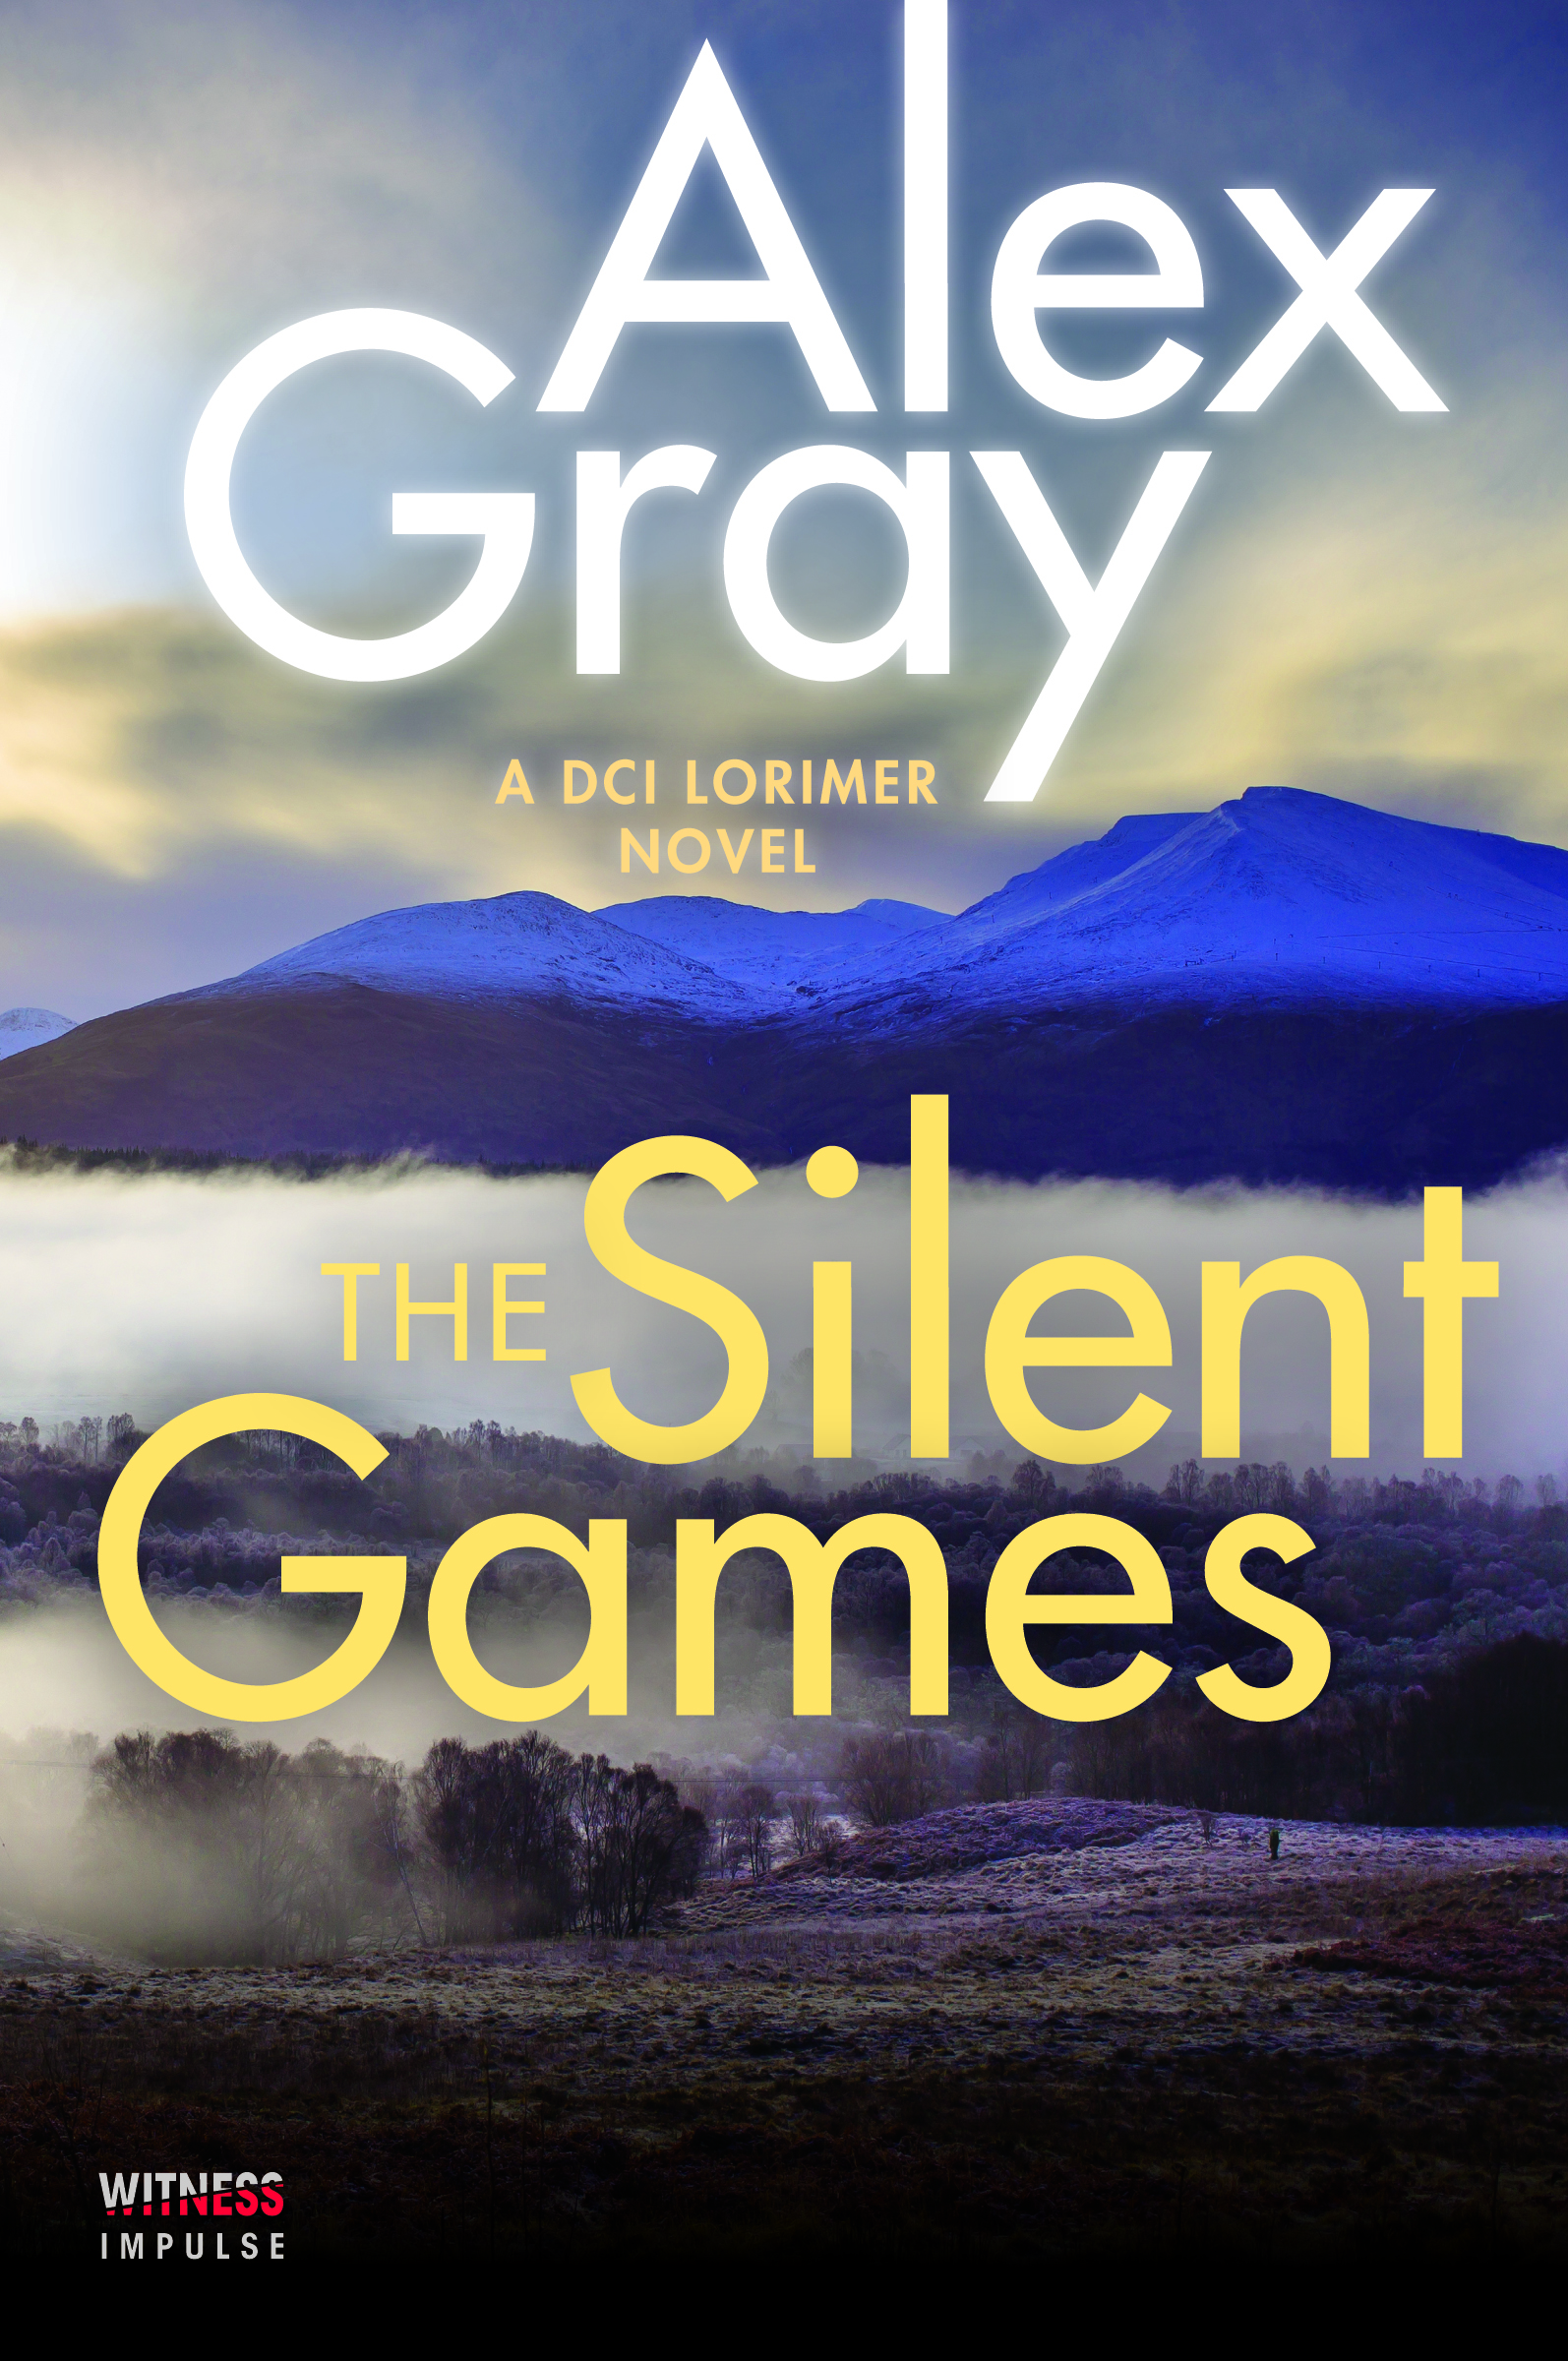 THE SILENT GAMES by Alex Gray